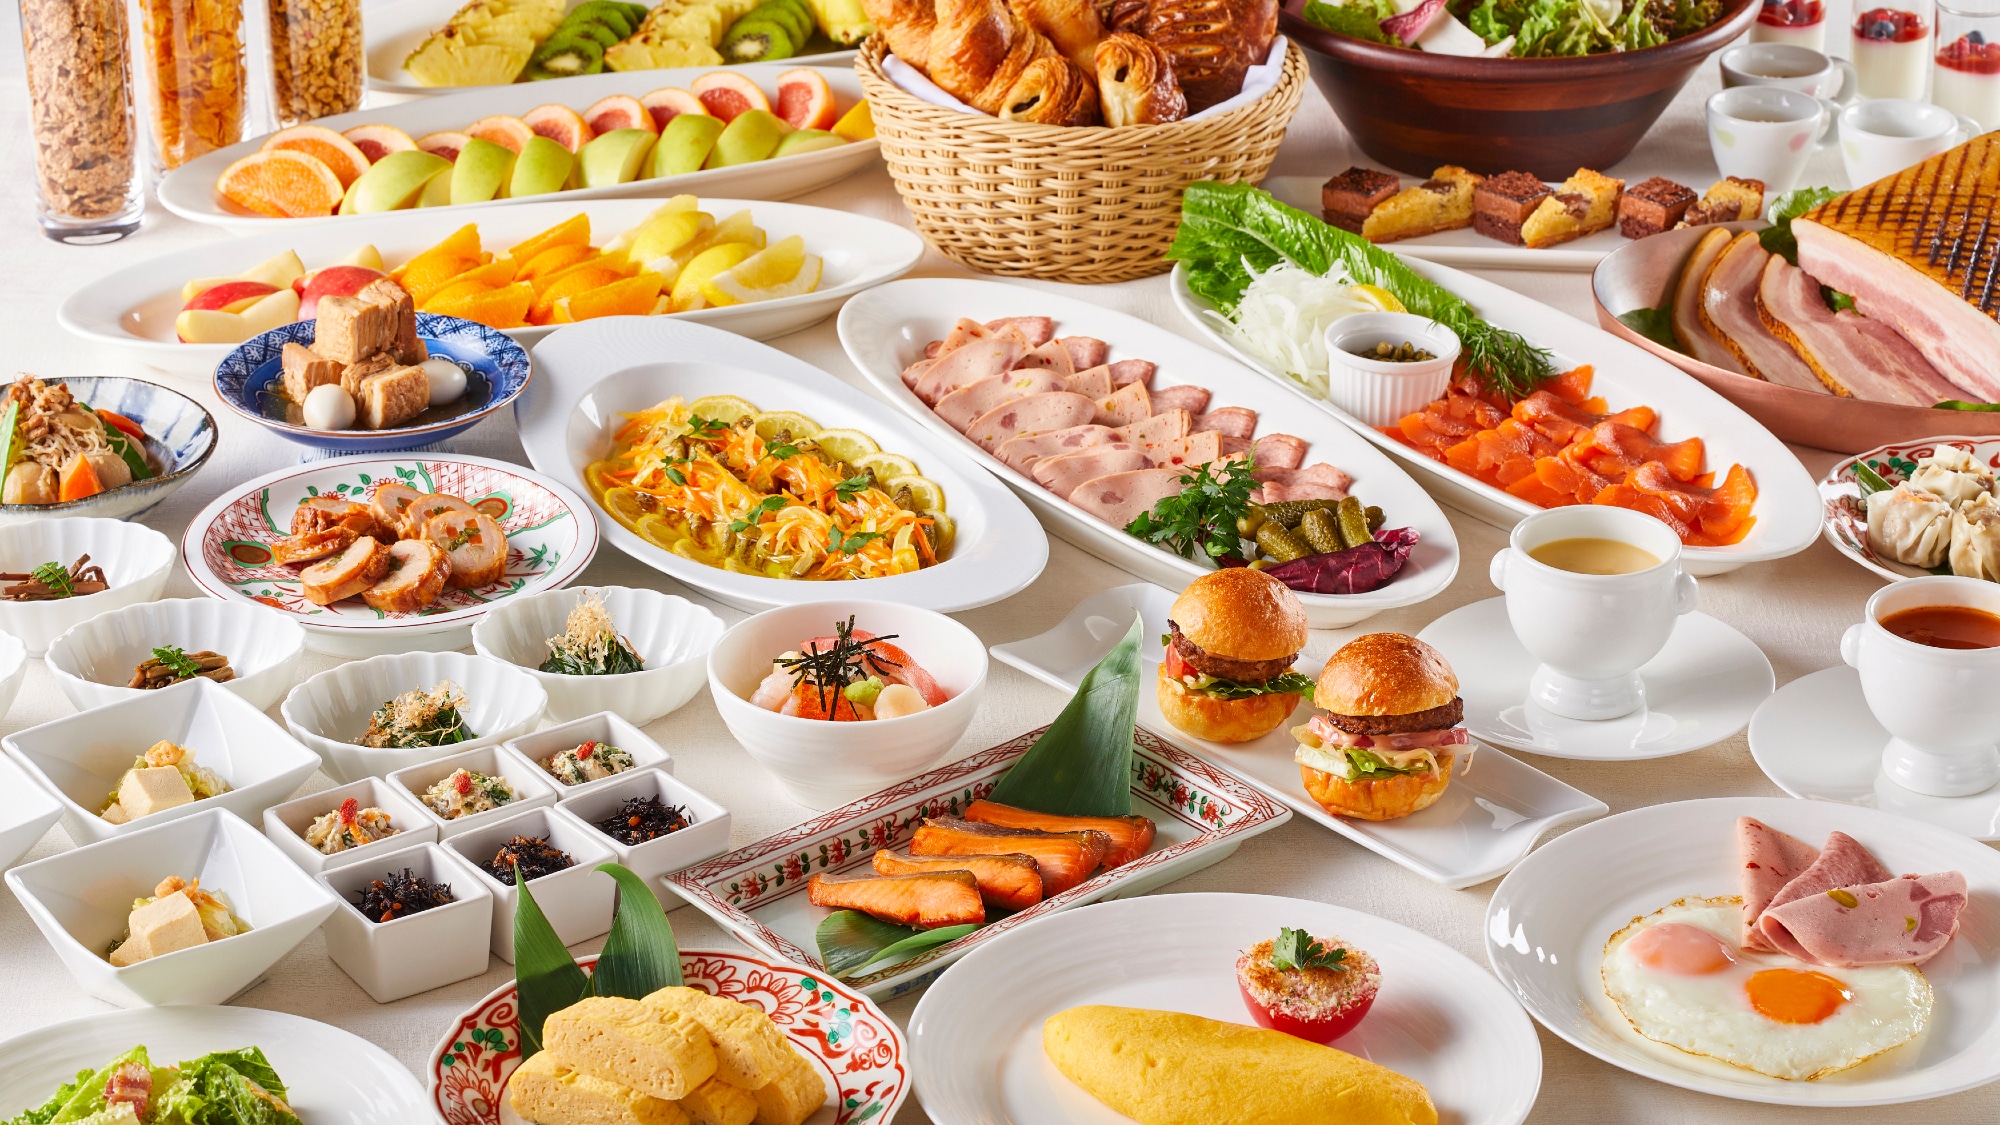 〇The hotel's proud breakfast buffet (image) where you can enjoy more than 100 kinds of menus